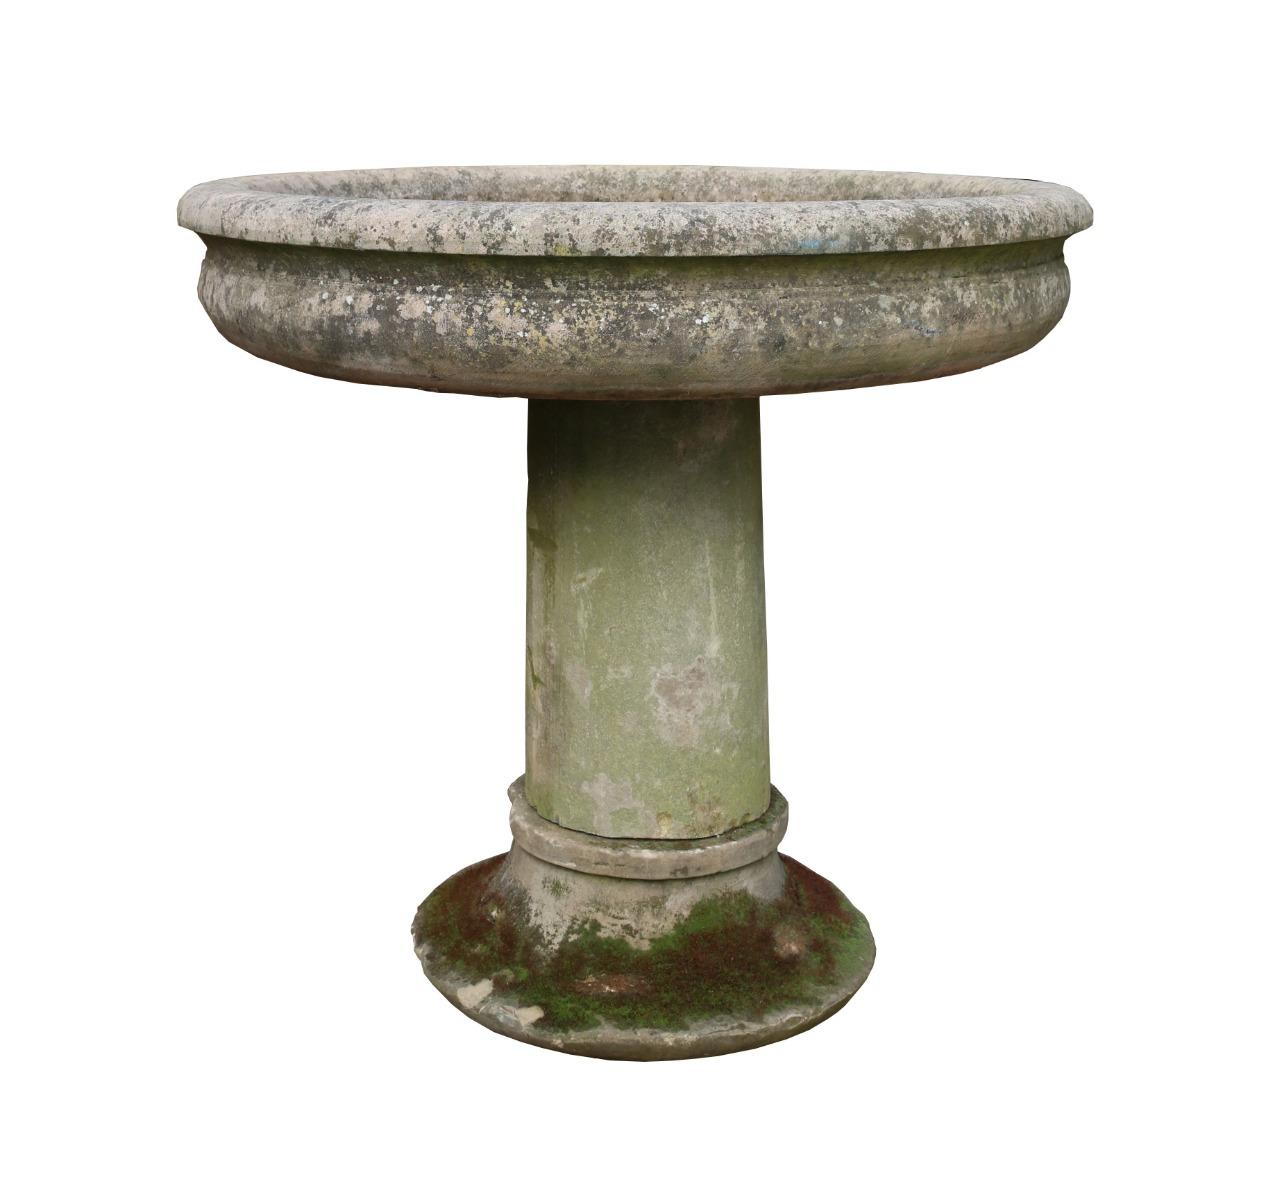 This York stone bowl has a weathered appearance and could be adapted to make a fountain.

Measures: Diameter of bowl 124 cm

Diameter of base 64 cm.